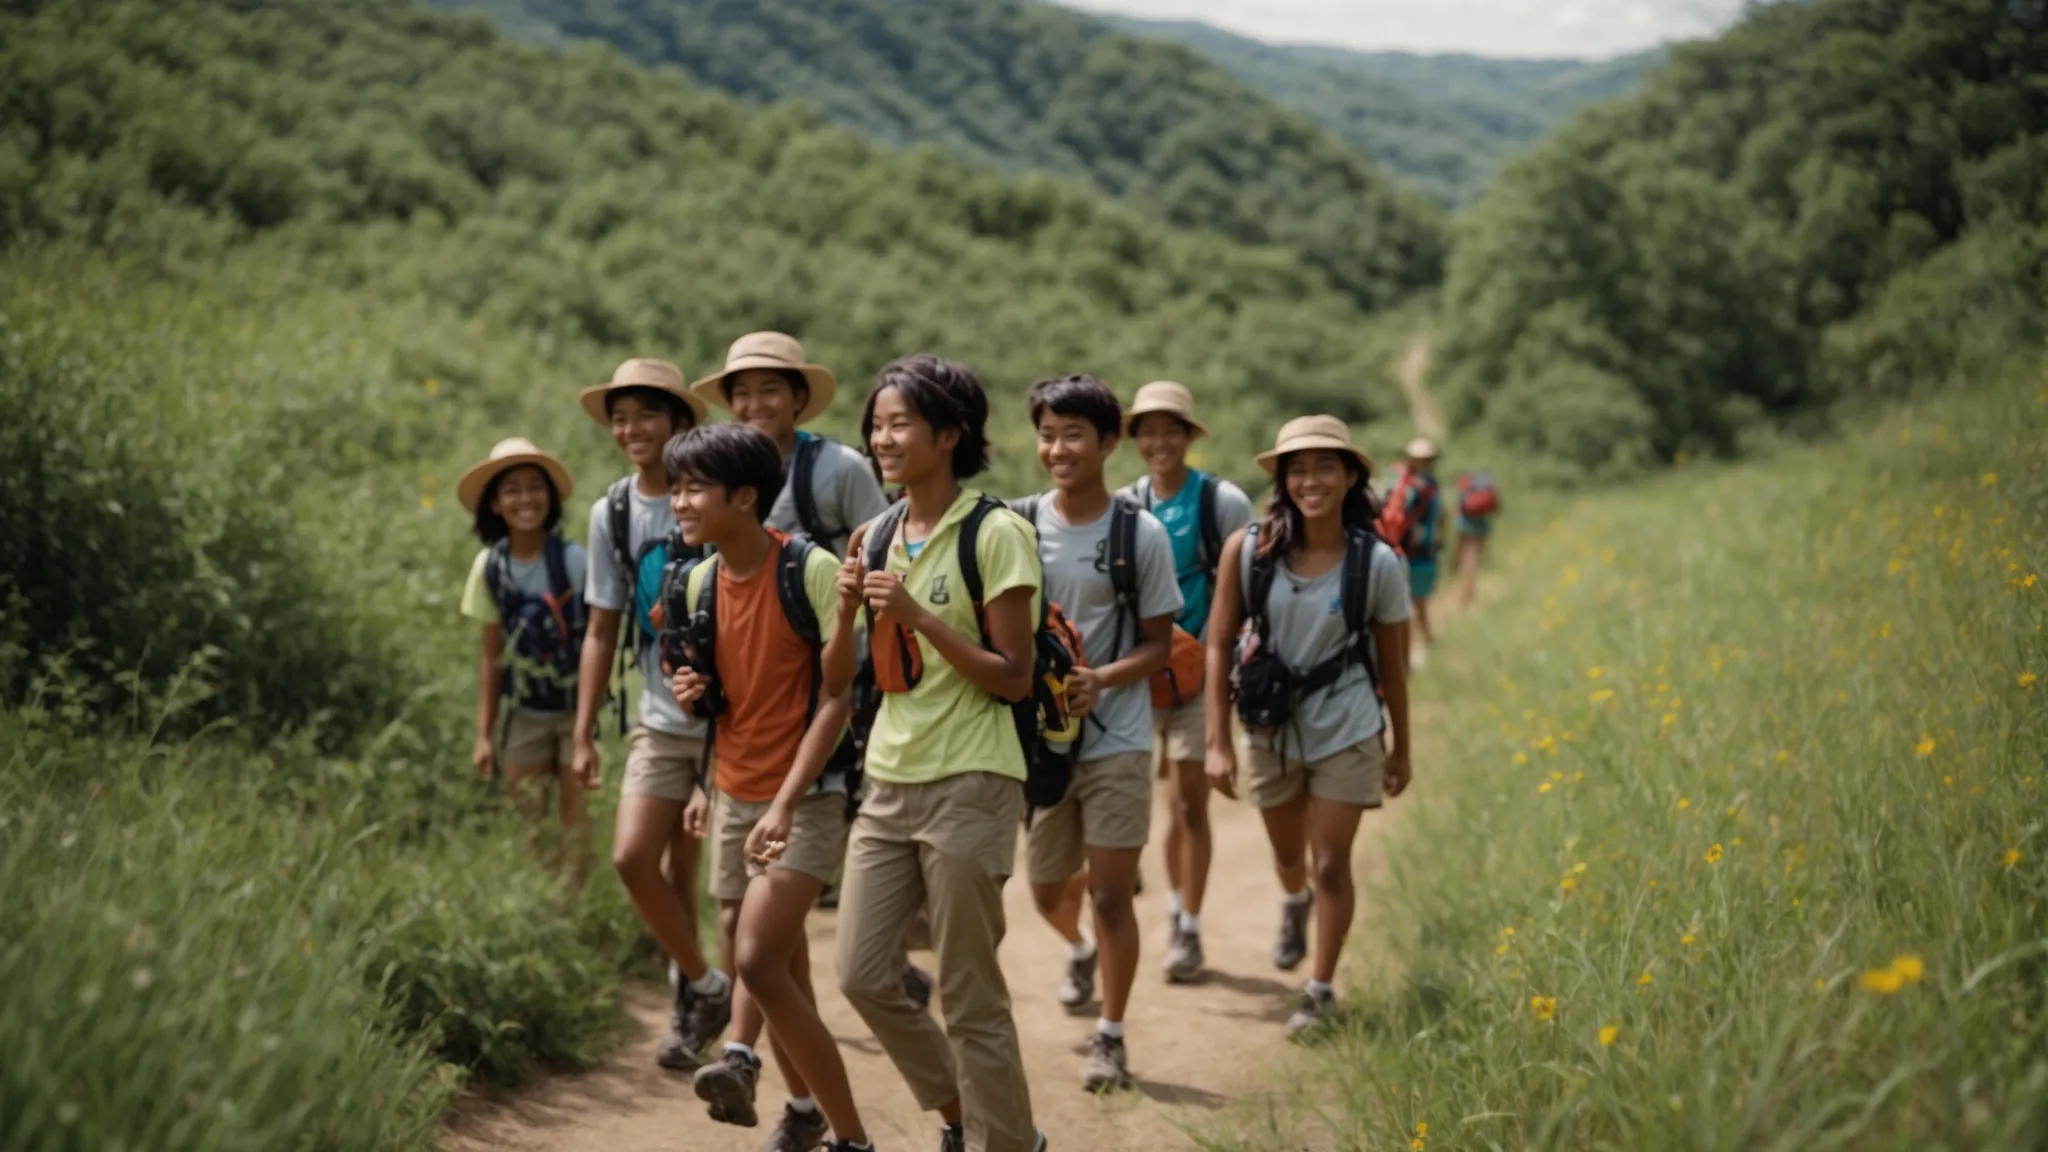 a group of students cheerfully embarks on a guided nature hike during a summer school field trip.